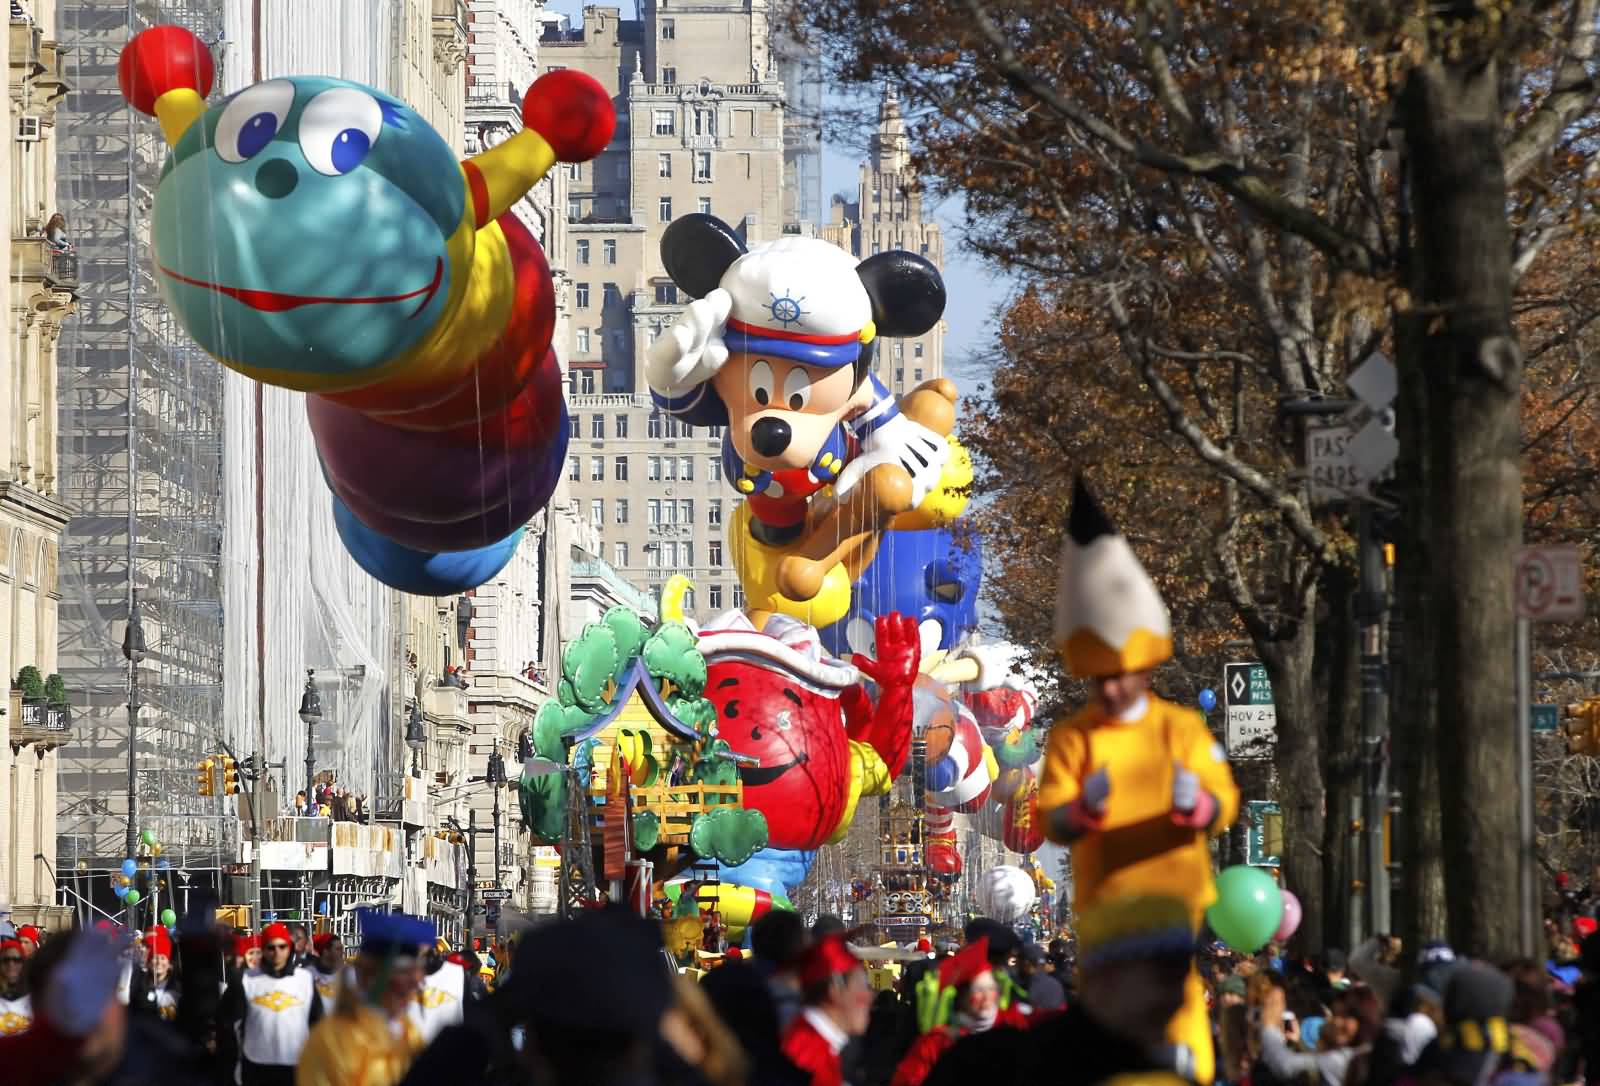 Balloons At The Macy's Thanksgiving Day Parade